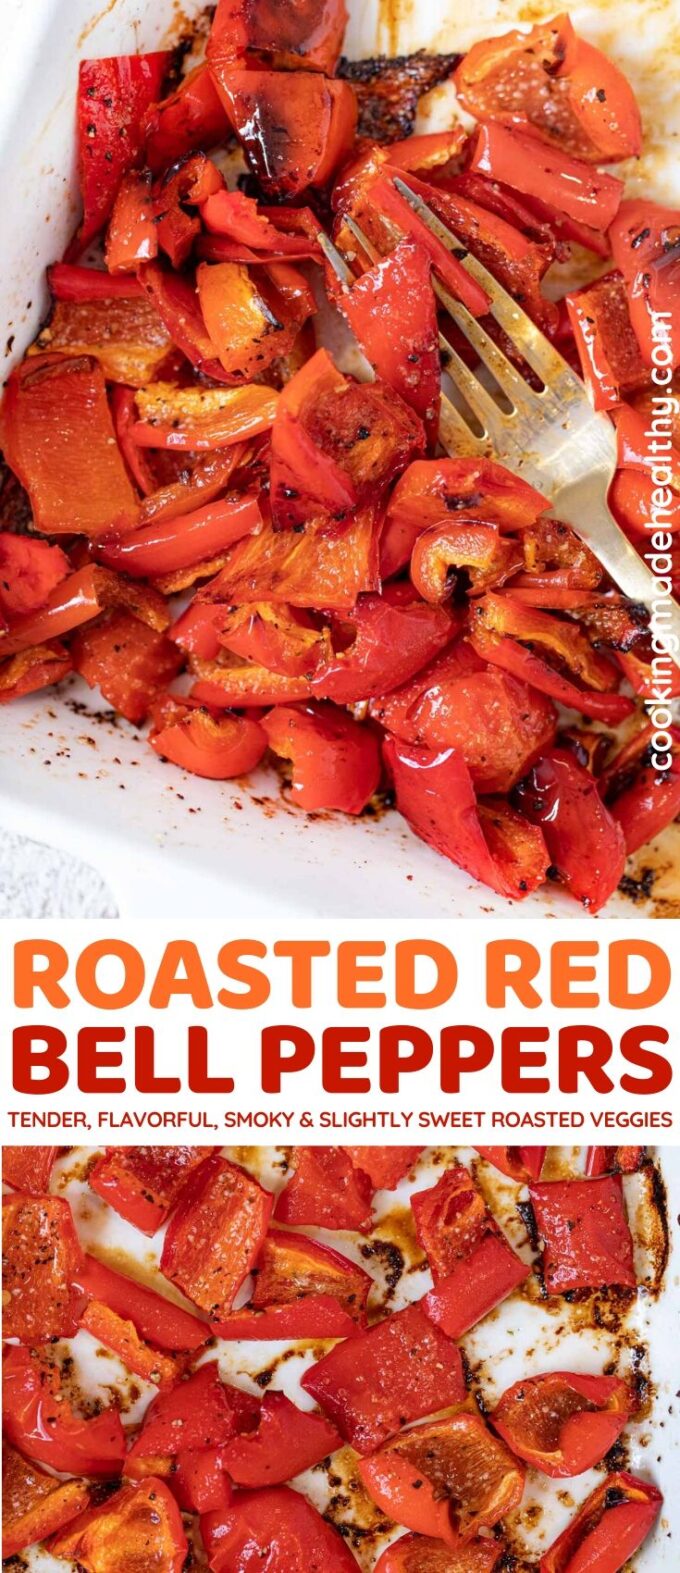 Roasted Red Bell Peppers Recipe - Cooking Made Healthy